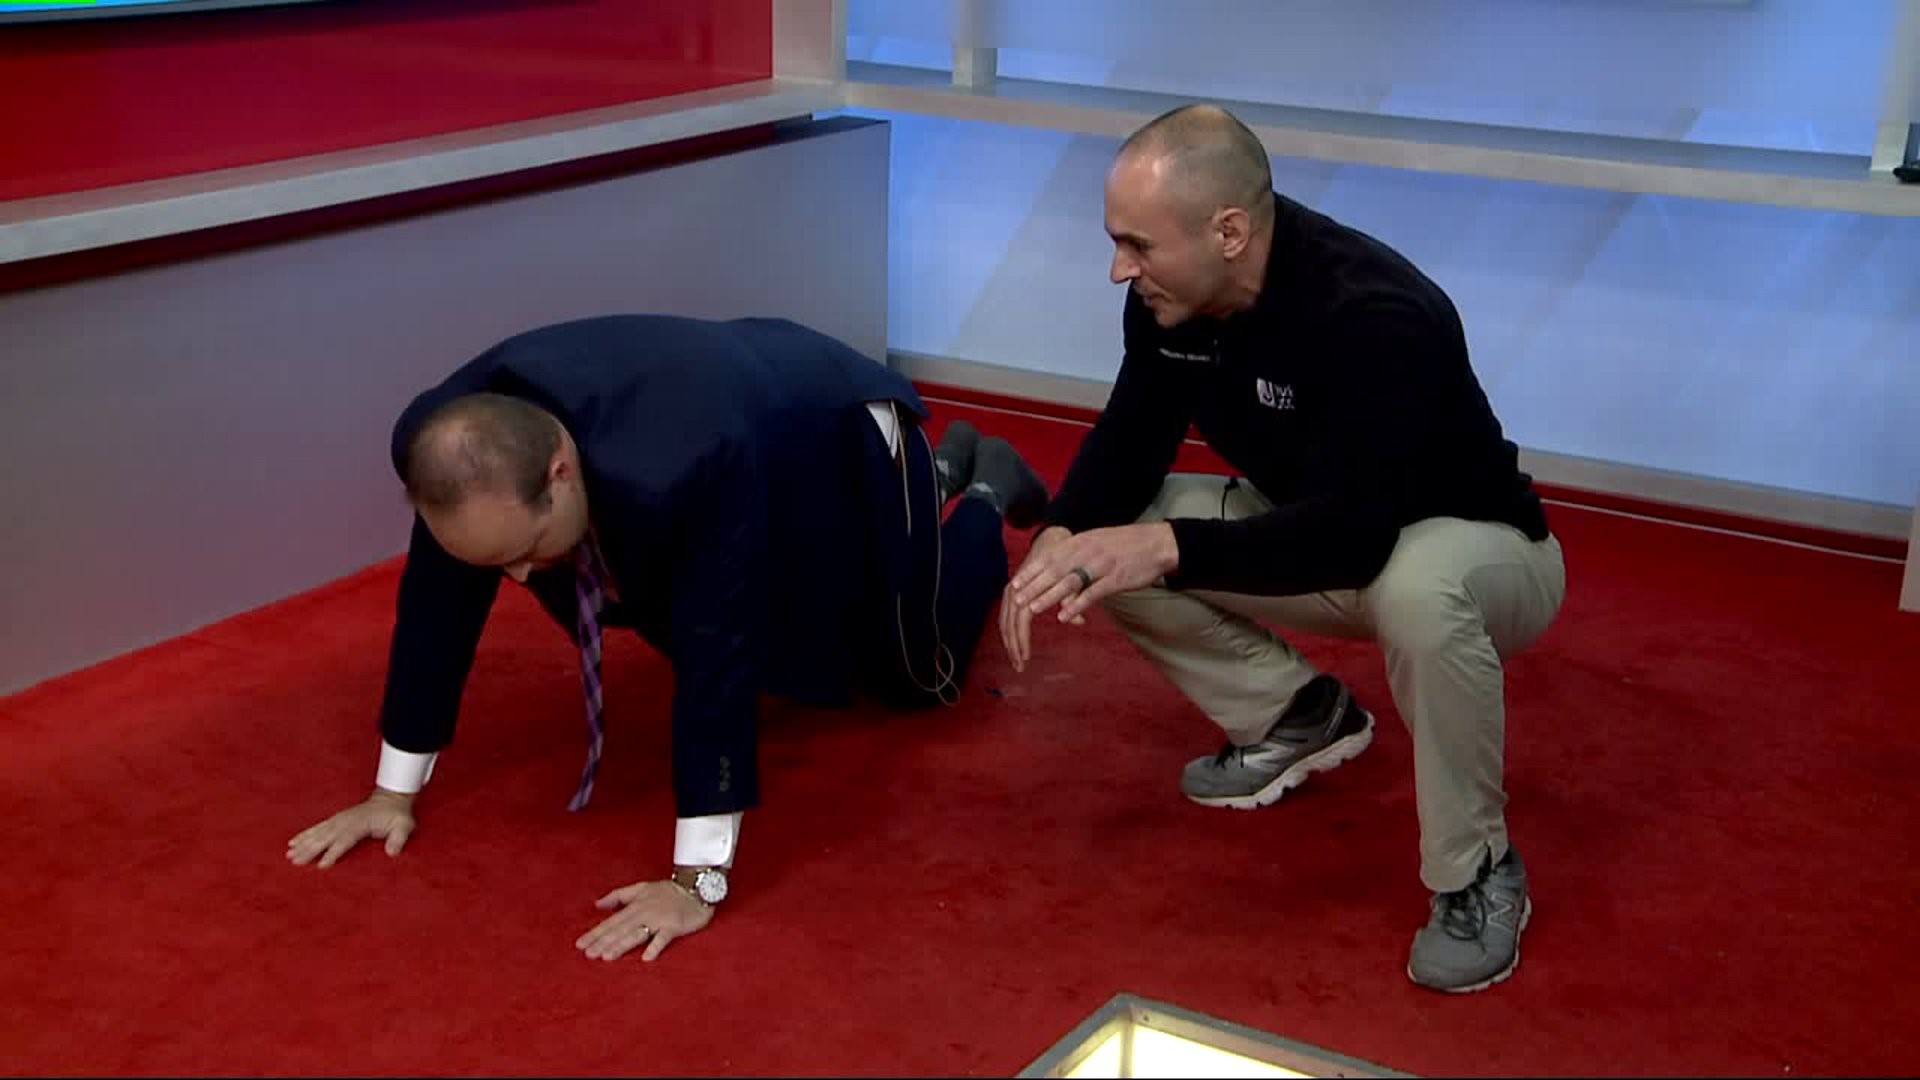 Live UP!: Working on proper push up form